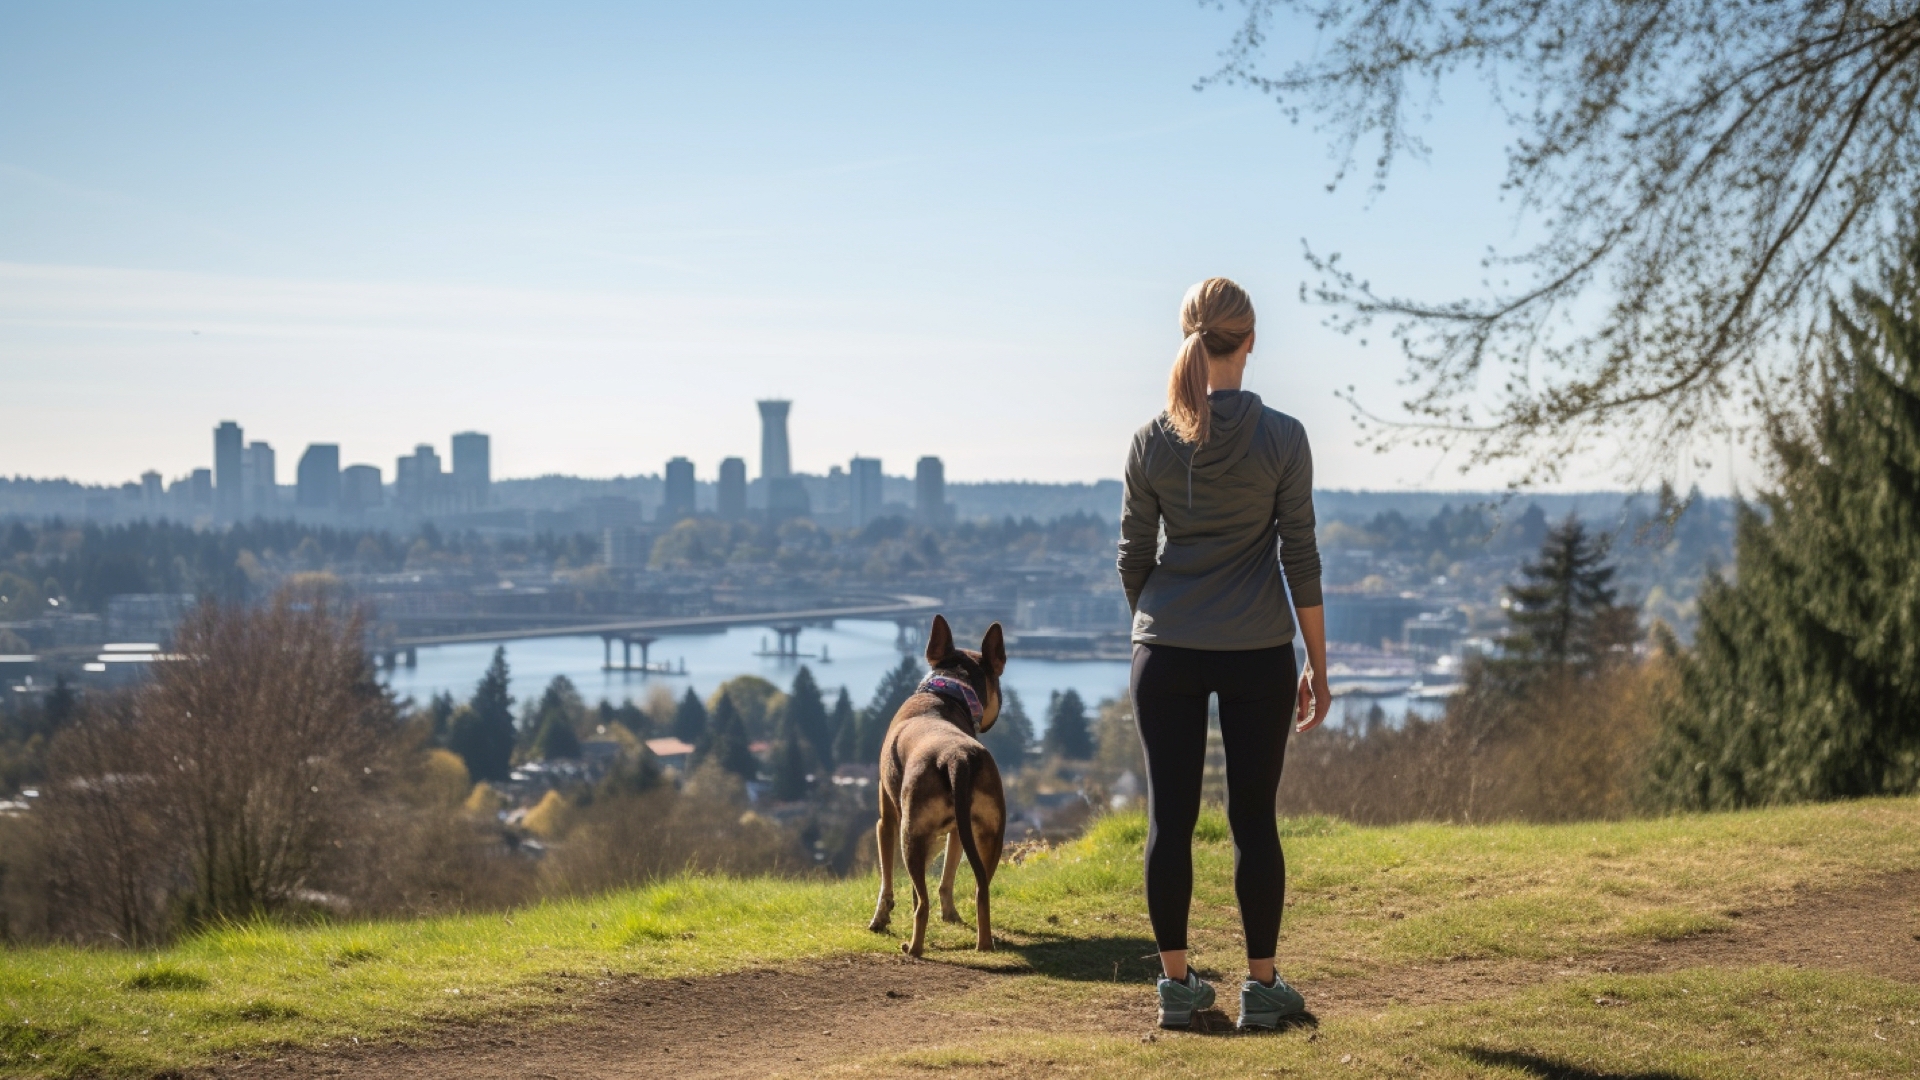 Dog Training in Portland's Summer, Tips for the Warm Months